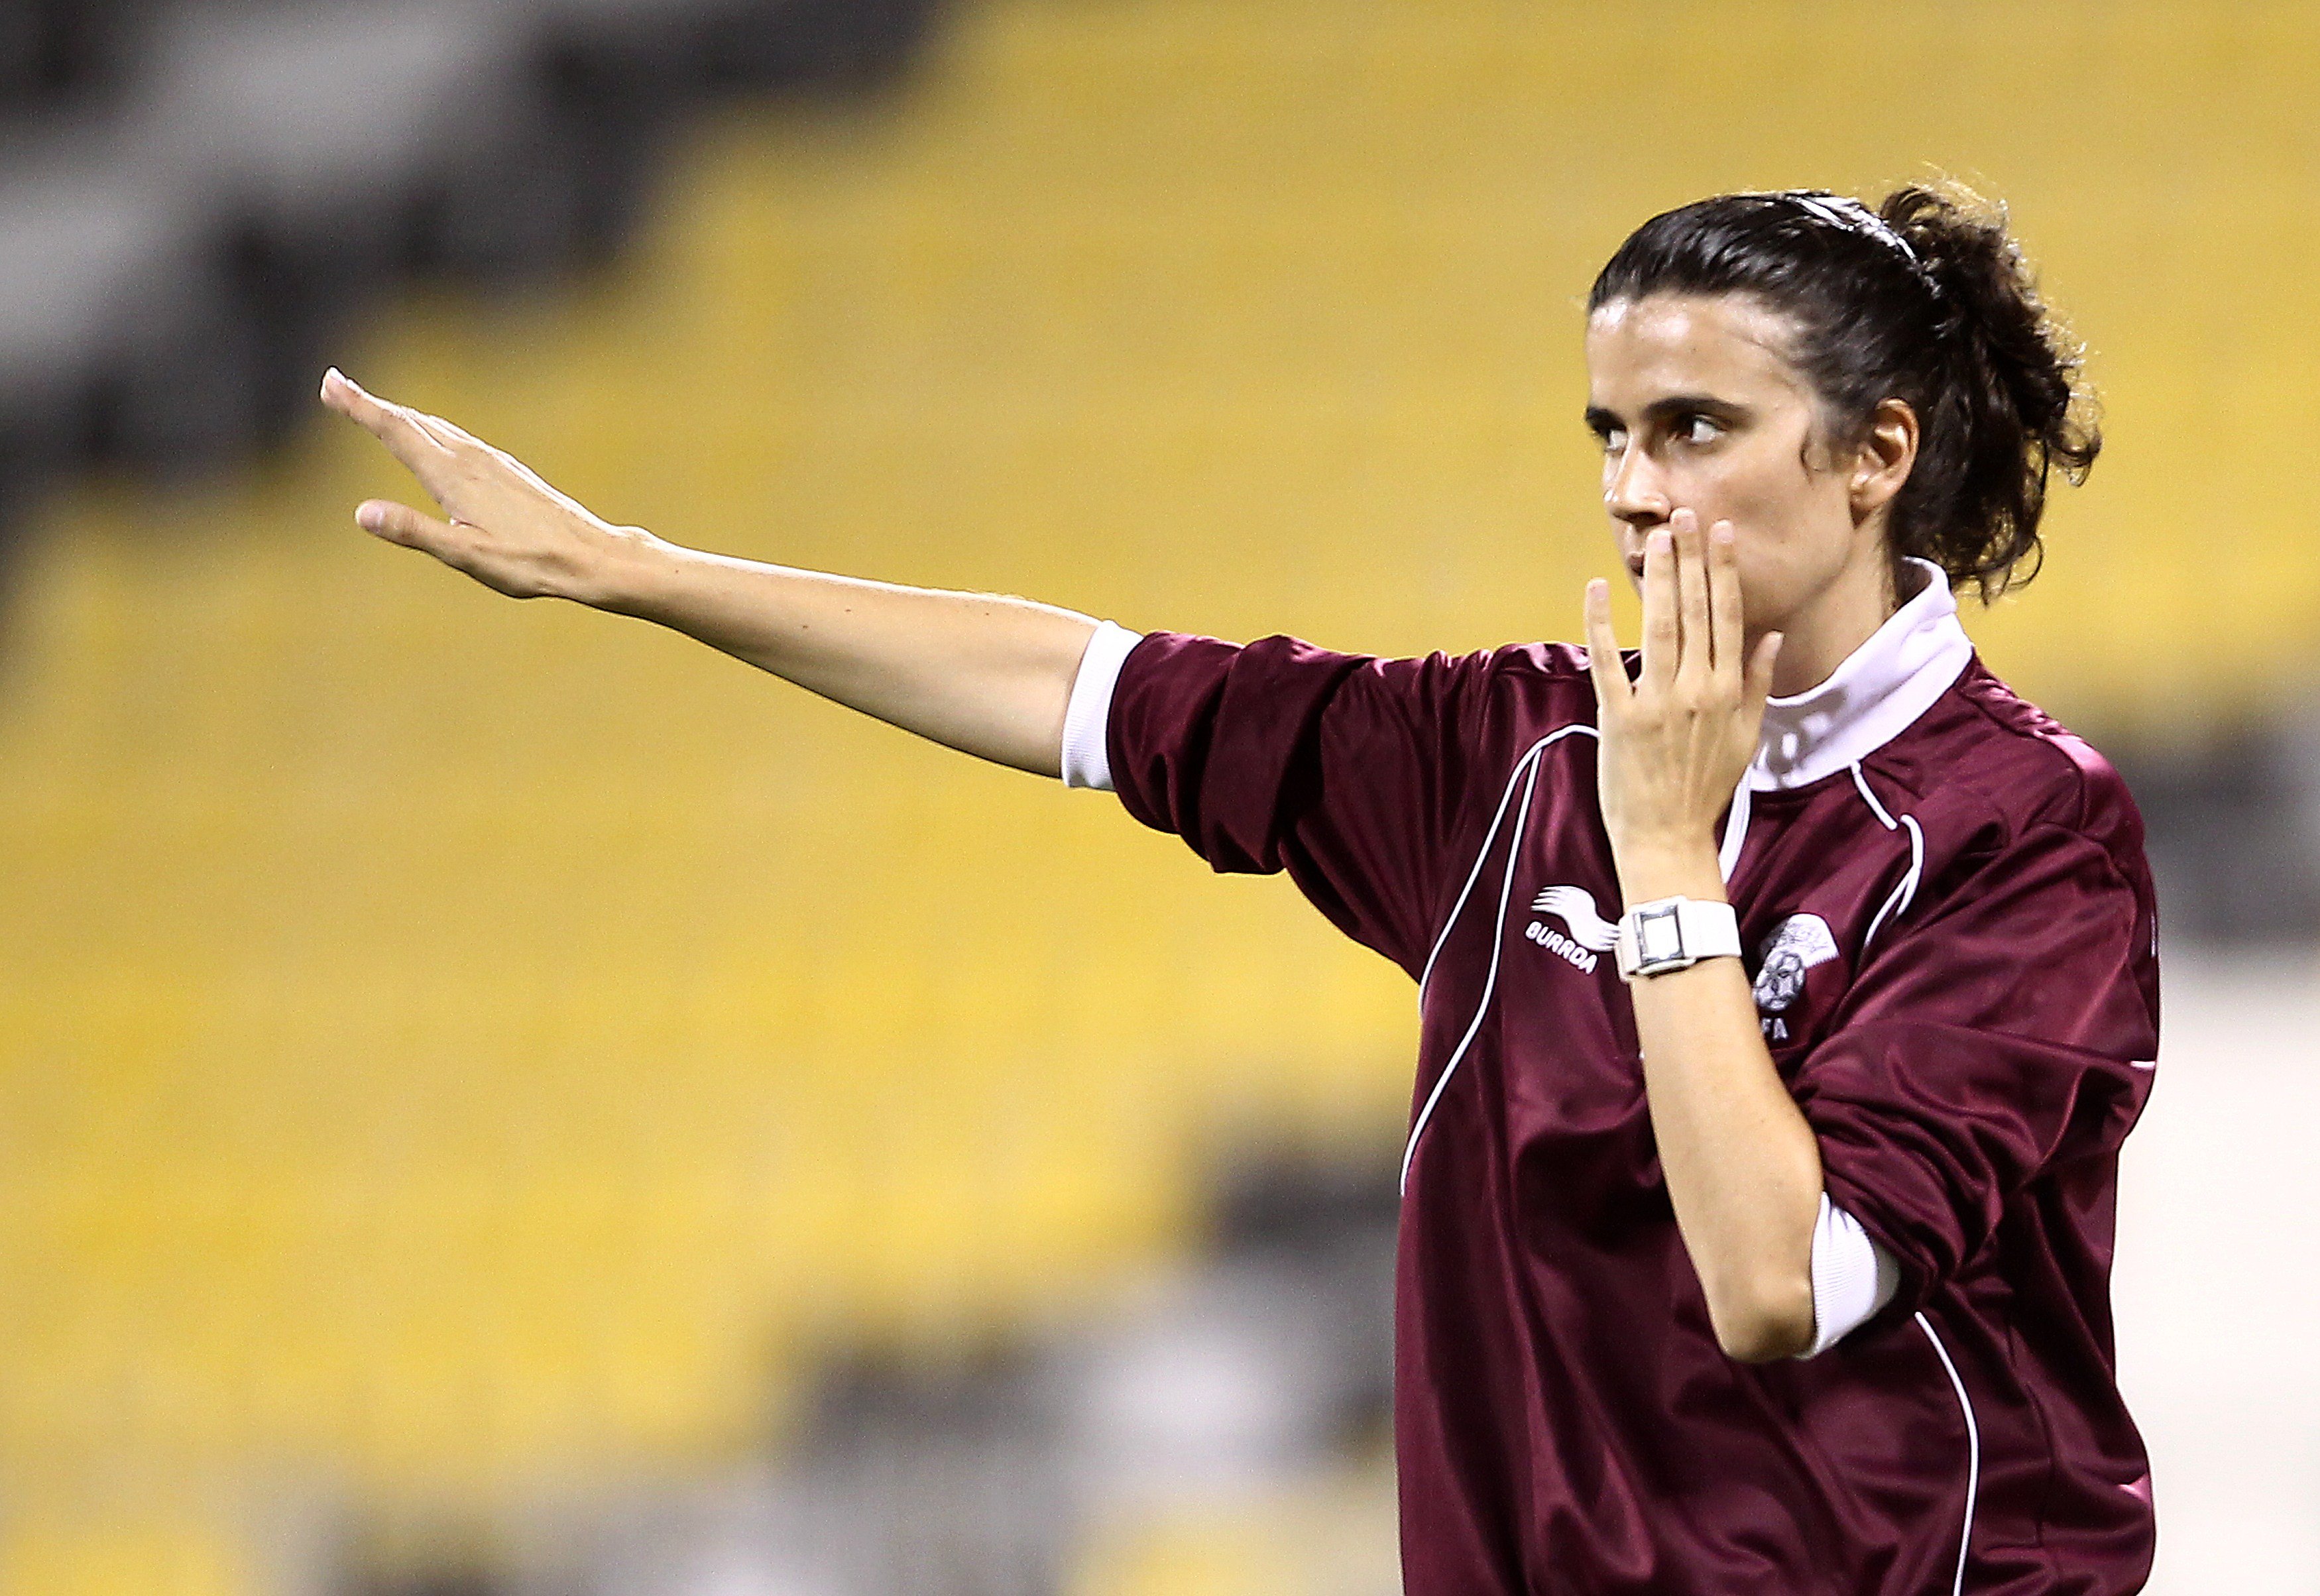 Portugal's Helena Costa in action as coach of Qatar's women football team on May 26, 2012. (AFP/Getty Images)